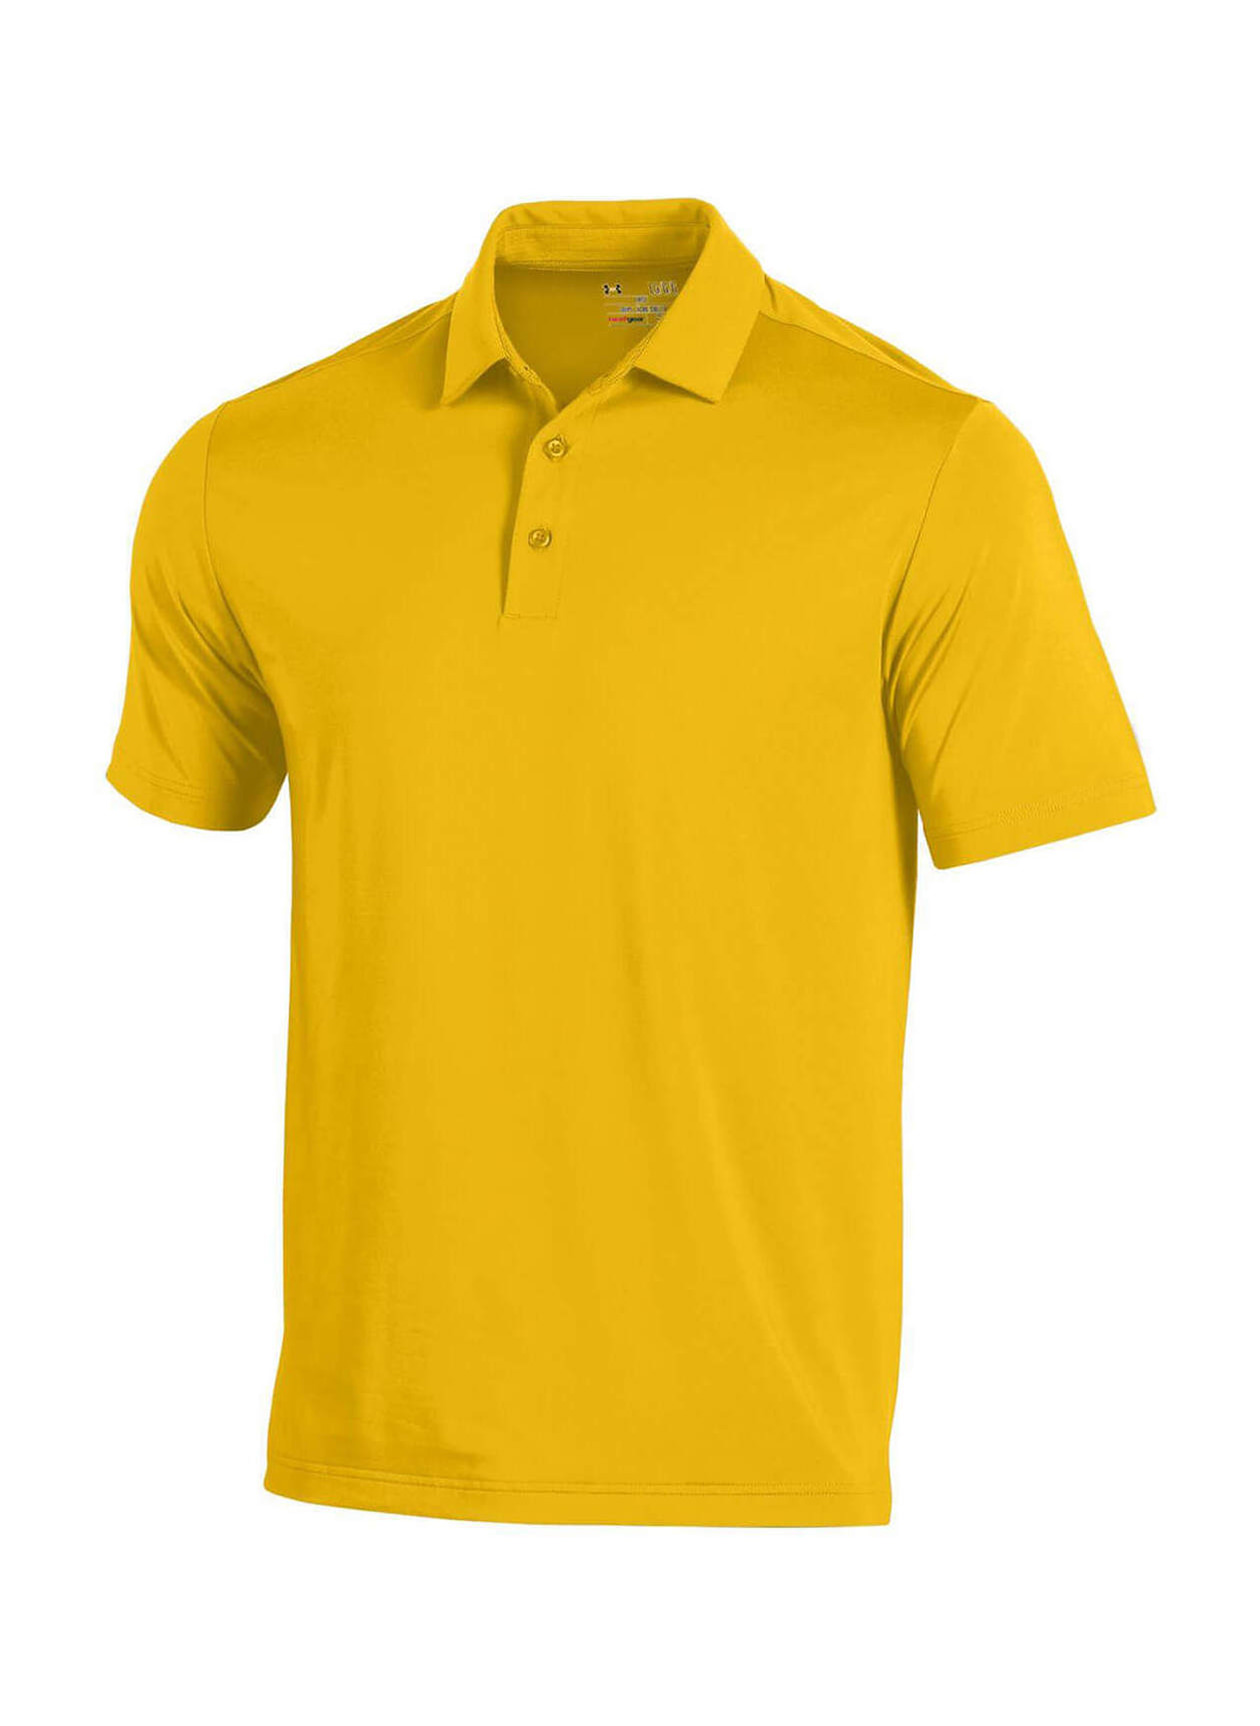 Under Armour Men's Steeltown Gold T2 Green Polo | Custom Embroidered ...